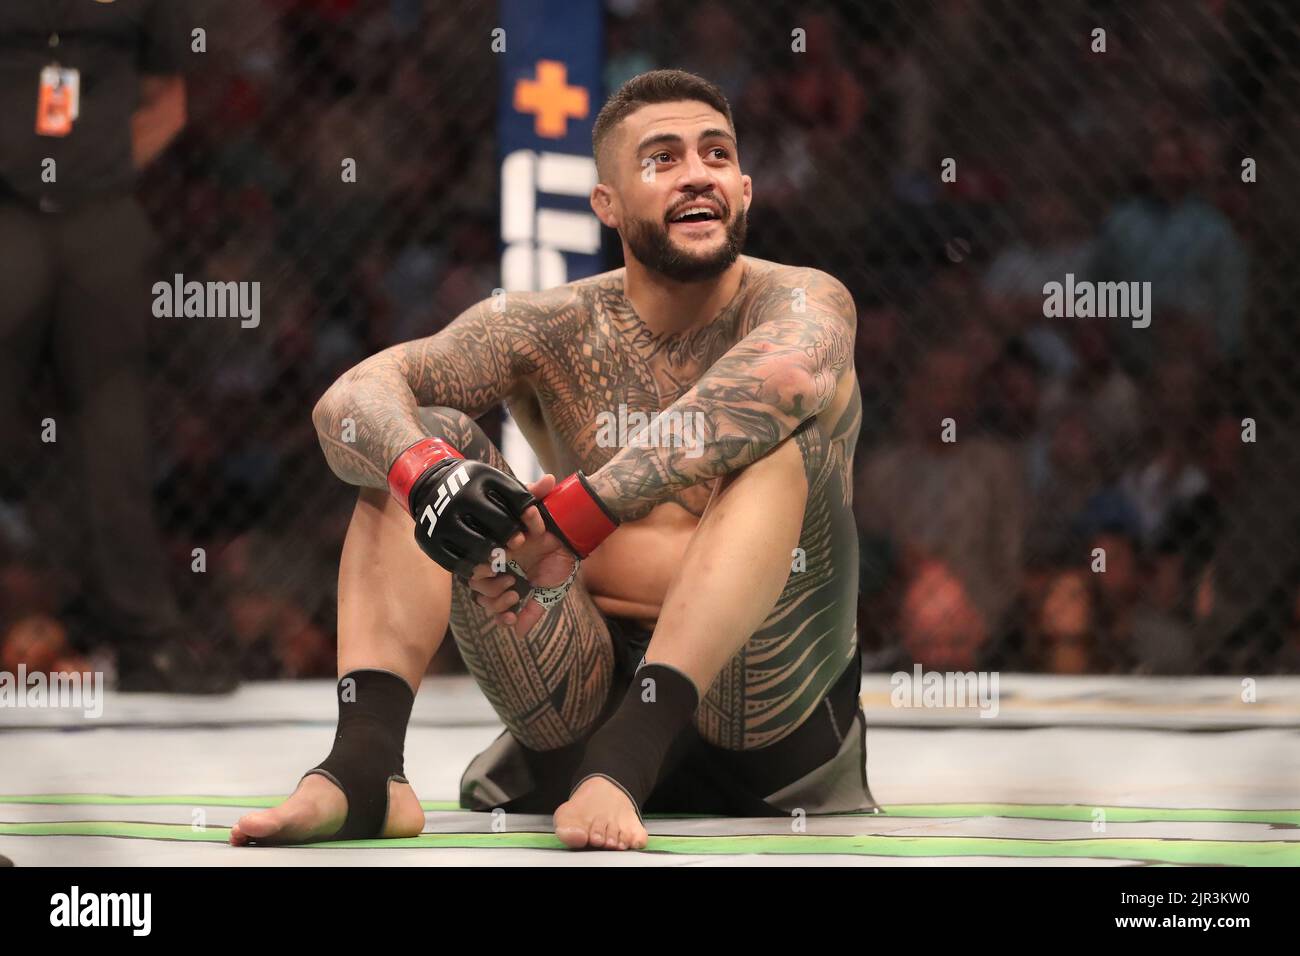 SALT LAKE CITY, UT - AUGUST 20: Tyson Pedro and Harry Hunsucker meet in the octagon for their Light Heavyweight bout at UFC 278 at the Vivint Arena on August 20, 2022 in Salt Lake City, Utah, United States. (Photo by Alejandro Salazar/PxImages) Stock Photo